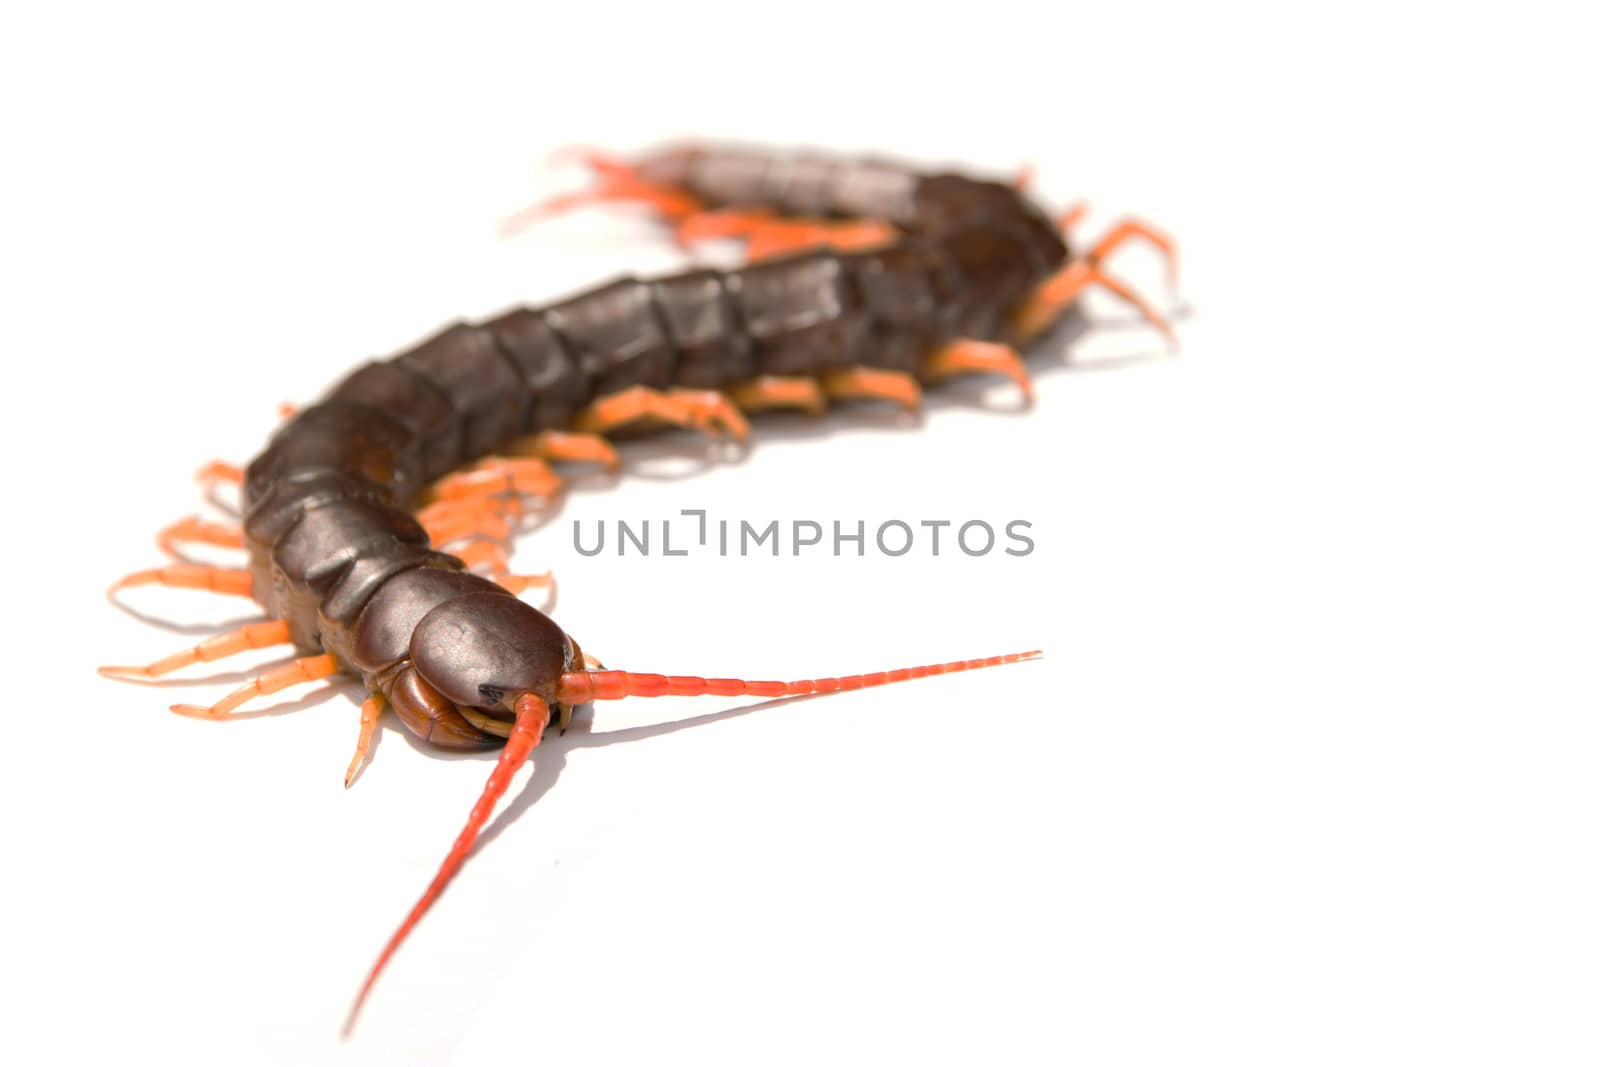 Giant centipede Scolopendra subspinipes isolated on white background.